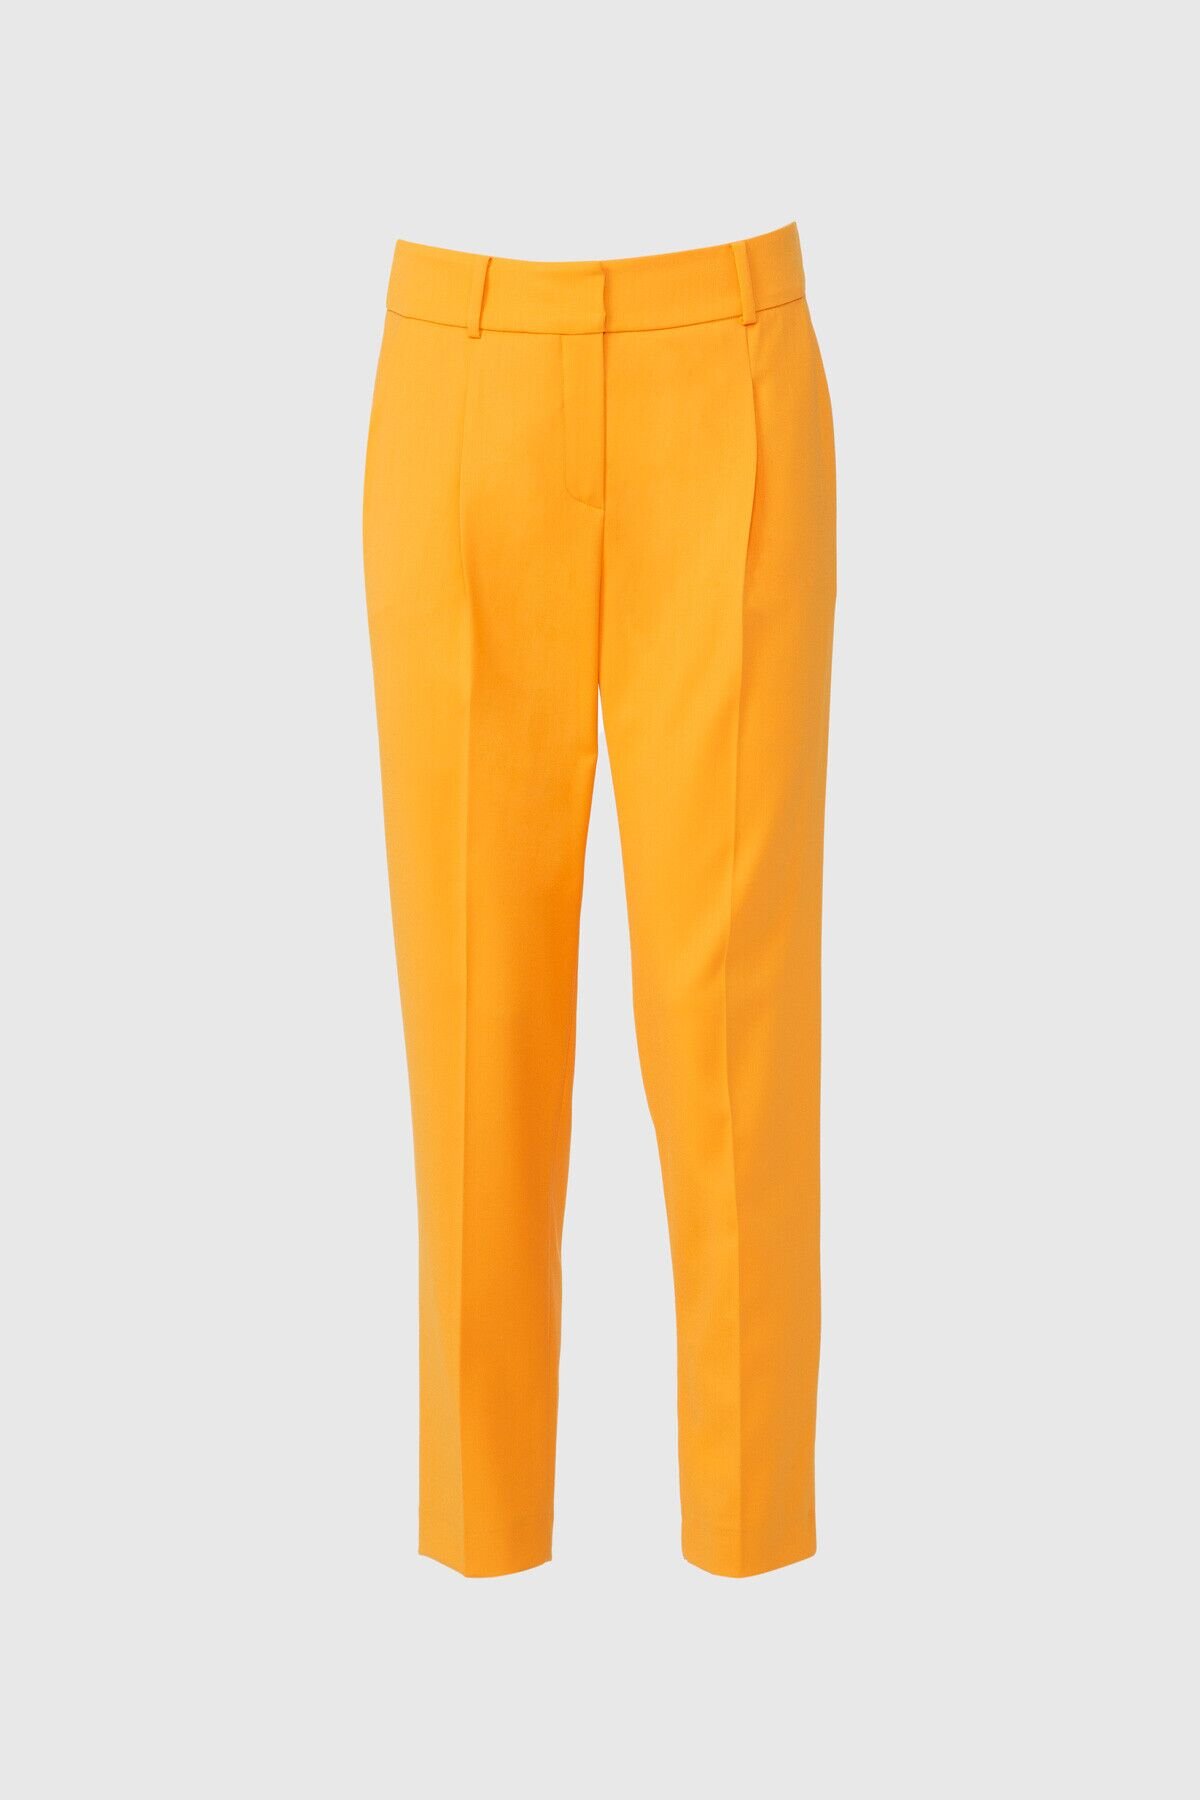 Classic Ankle Length Orange Trousers